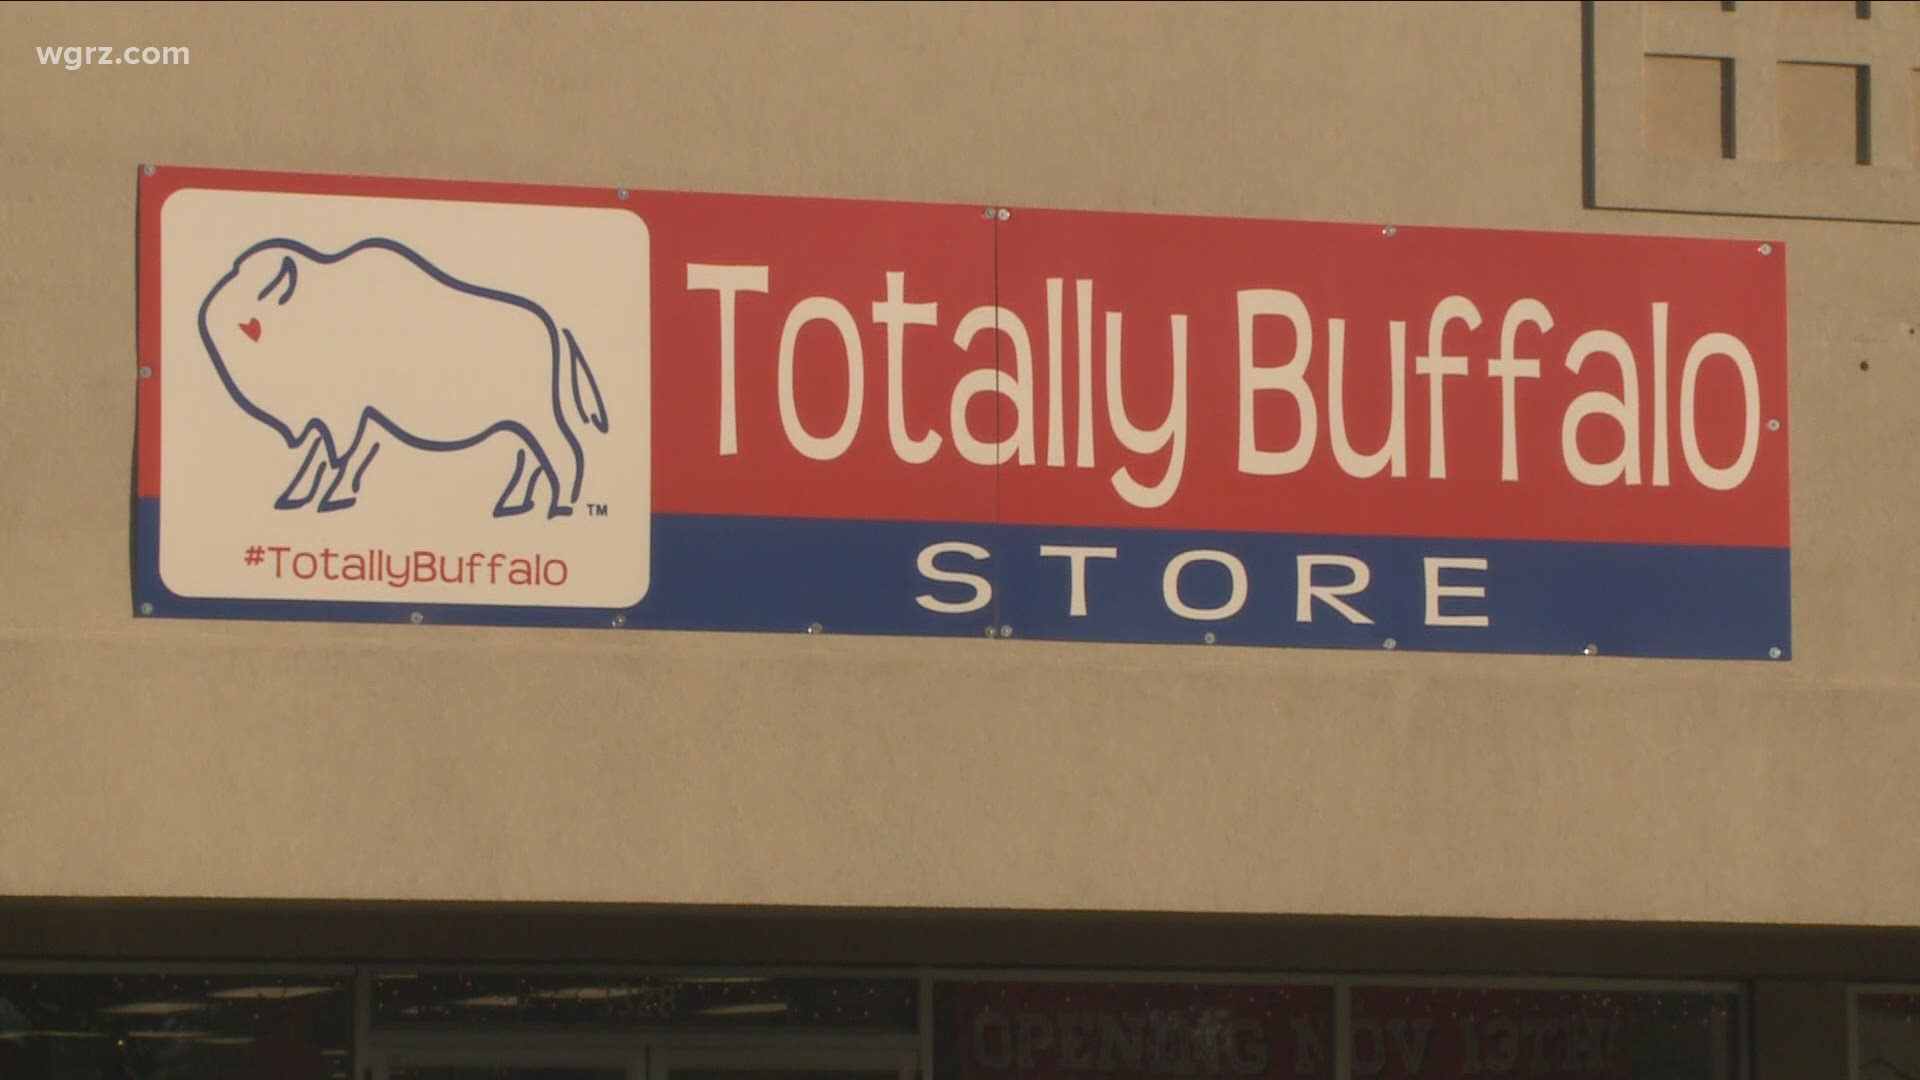 The "Totally Buffalo" store will sell items from 45 local vendors out a storefront on Sheridan Drive starting Friday, November 13.